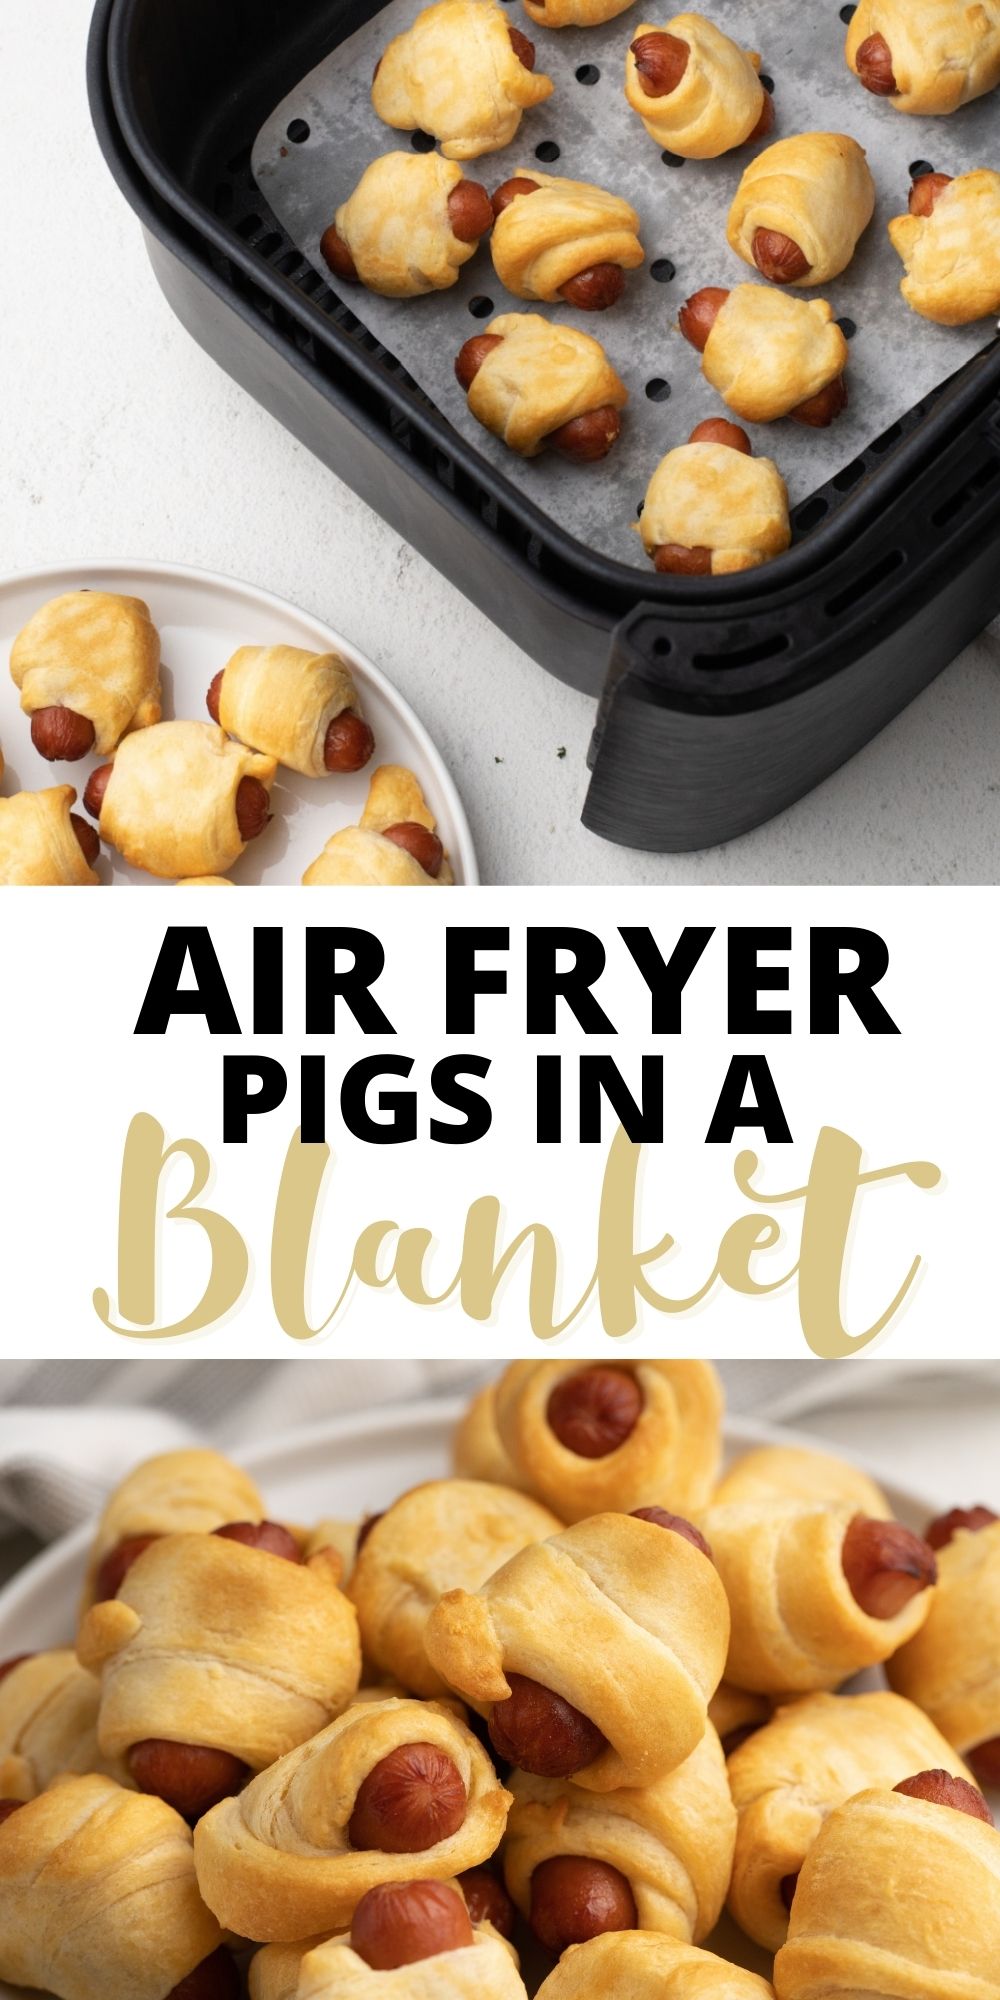 Pigs in a Blanket are made quick and easy in the Air Fryer! This easy appetizer uses crescent rolls and cocktail sausages for a delicious snack that can be made in just 10 minutes! An easy recipe the whole family will love.